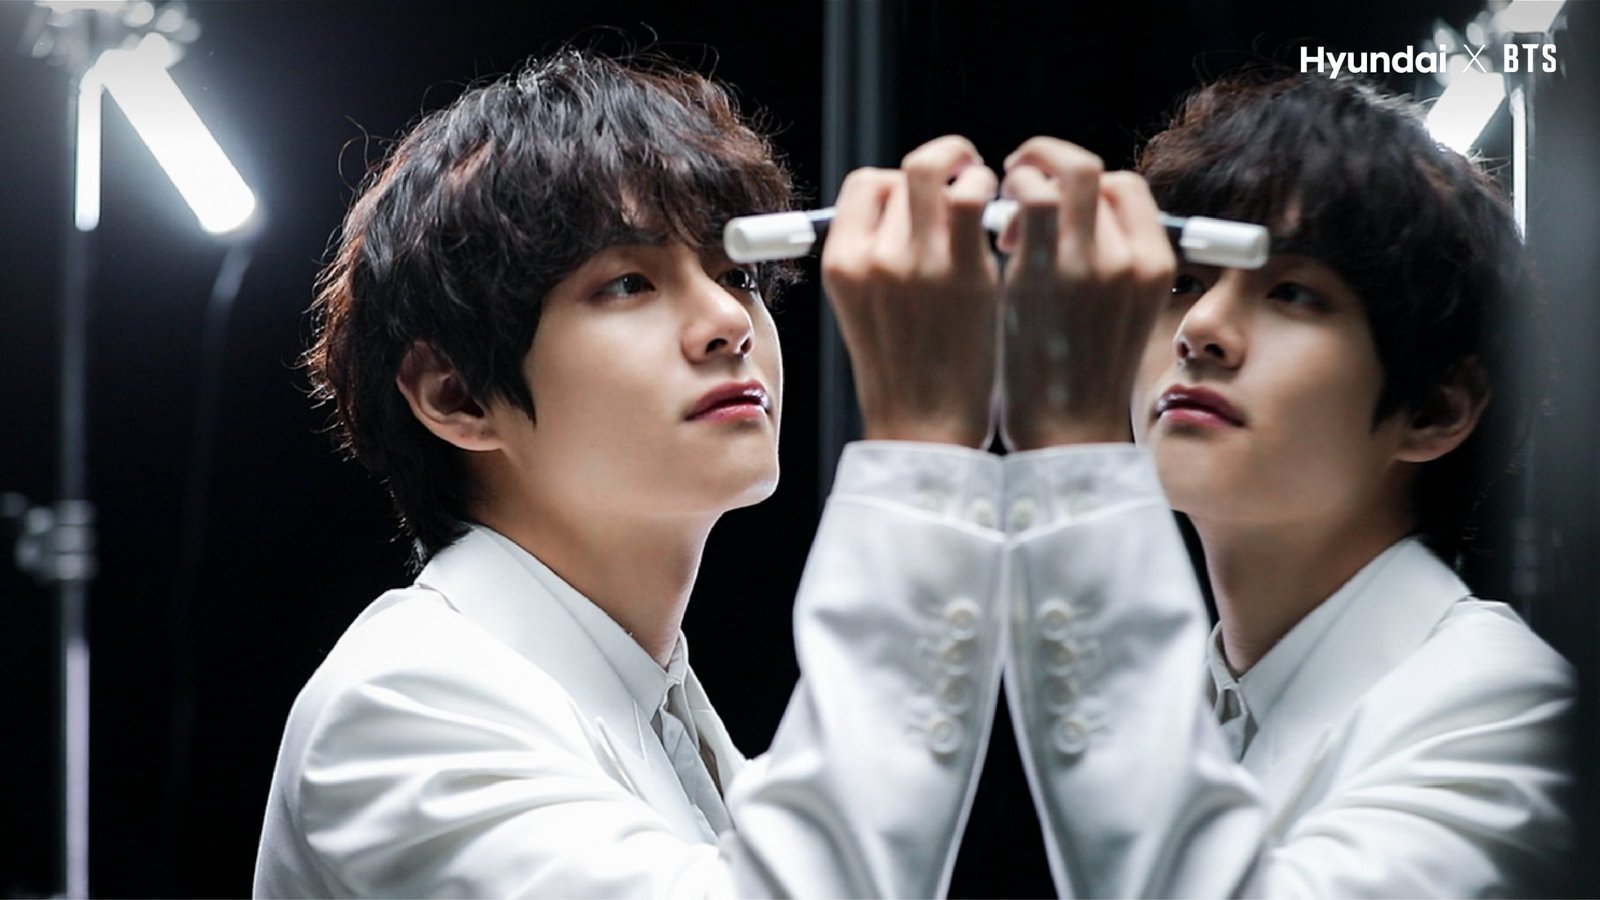 BTS V - Takes over SNS with the most 'like'